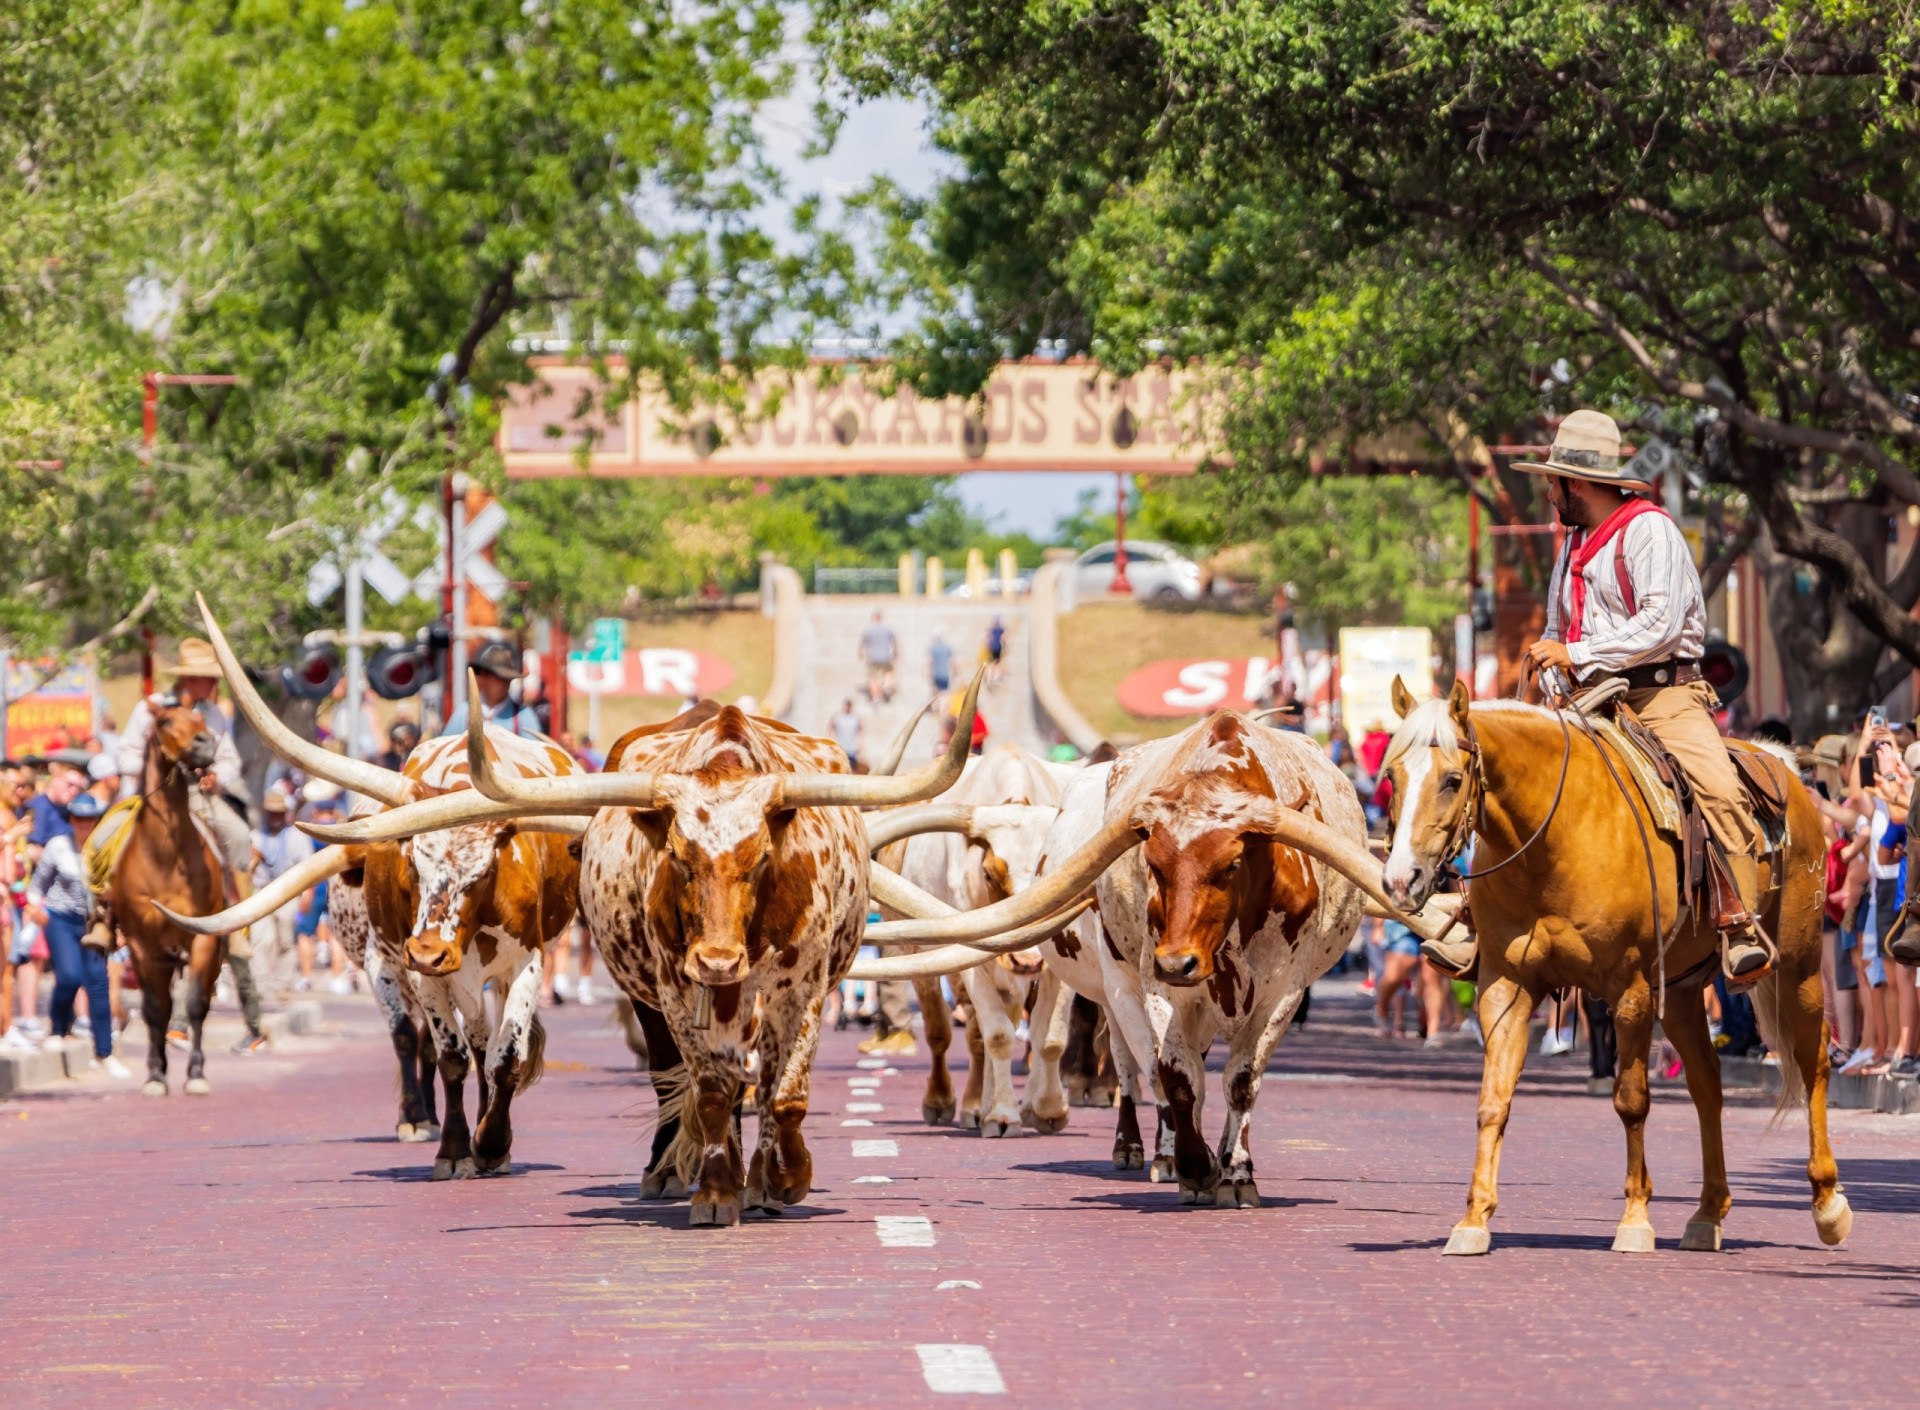 <p>Looking for a memorable Western experience? Things like stock shows, cattle drives, and bull riding? Then head over to Fort Worth, Texas. And here's a tip: the National Cowgirl Museum and Hall of Fame will host a 2024 exhibit honoring the Mexican female horseback riding tradition of <em>escaramuza charra</em>. Saddle up, ladies!</p><p>You may also like:<a href="https://www.starsinsider.com/n/411996?utm_source=msn.com&utm_medium=display&utm_campaign=referral_description&utm_content=636762en-en"> Bruce Lee: from martial artist to Hollywood star</a></p>